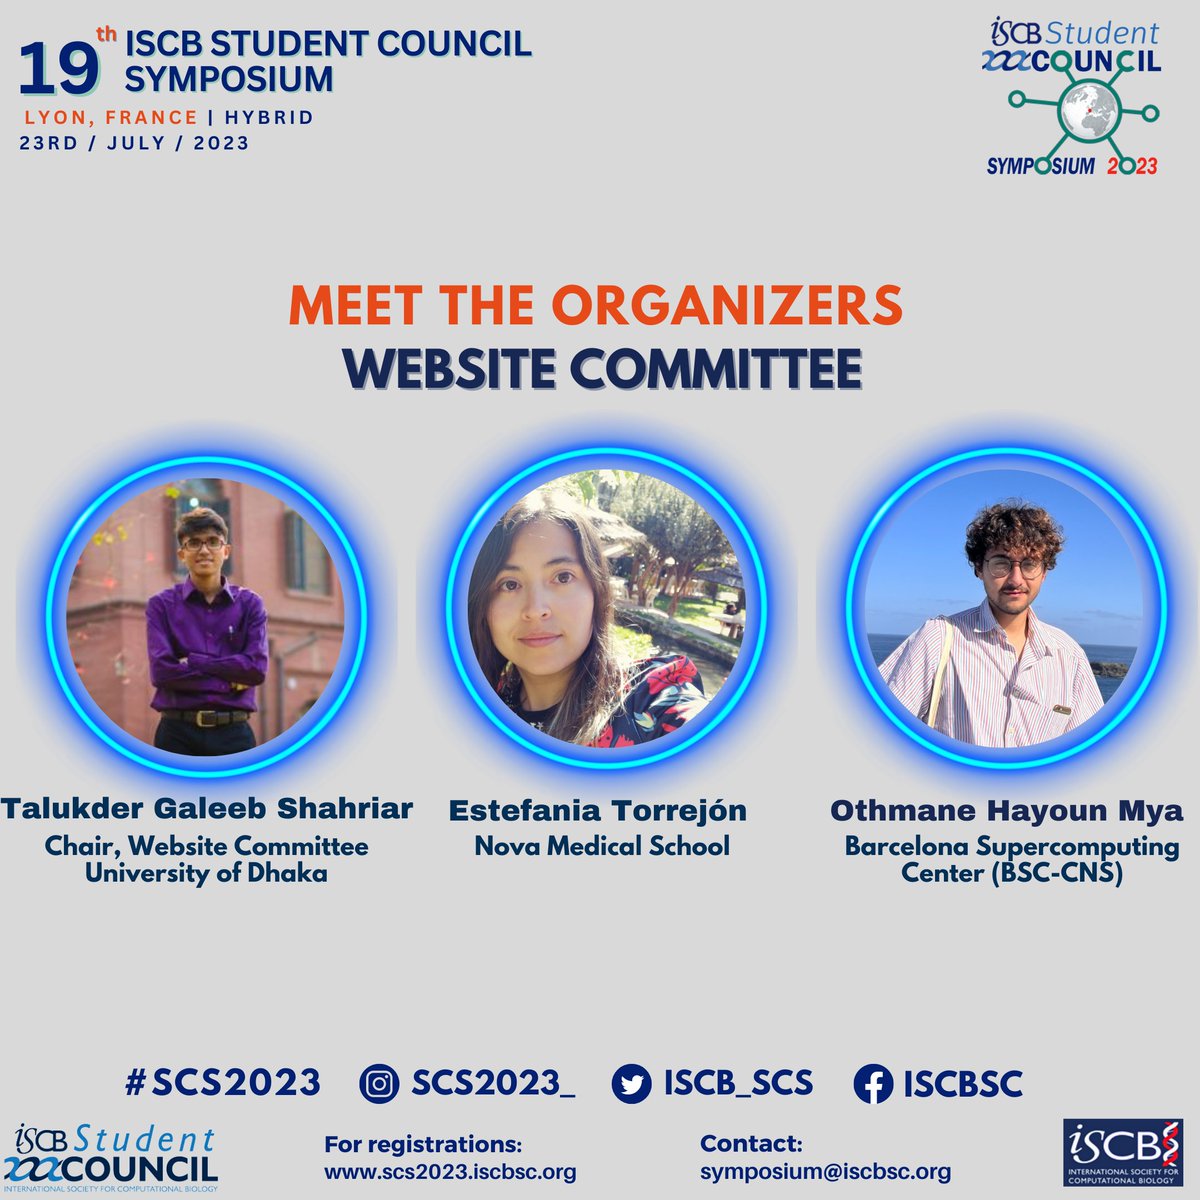 Let’s meet esteemed committee members who are shaping the upcoming #SCS2023

Without their tireless efforts, the symposium would not have been possible

🔥Stay tuned for the updates SCS2023

🔗Register here: scs2023.iscbsc.org/Registration 
#Bioinformatics #Conference #Committee #ISCB